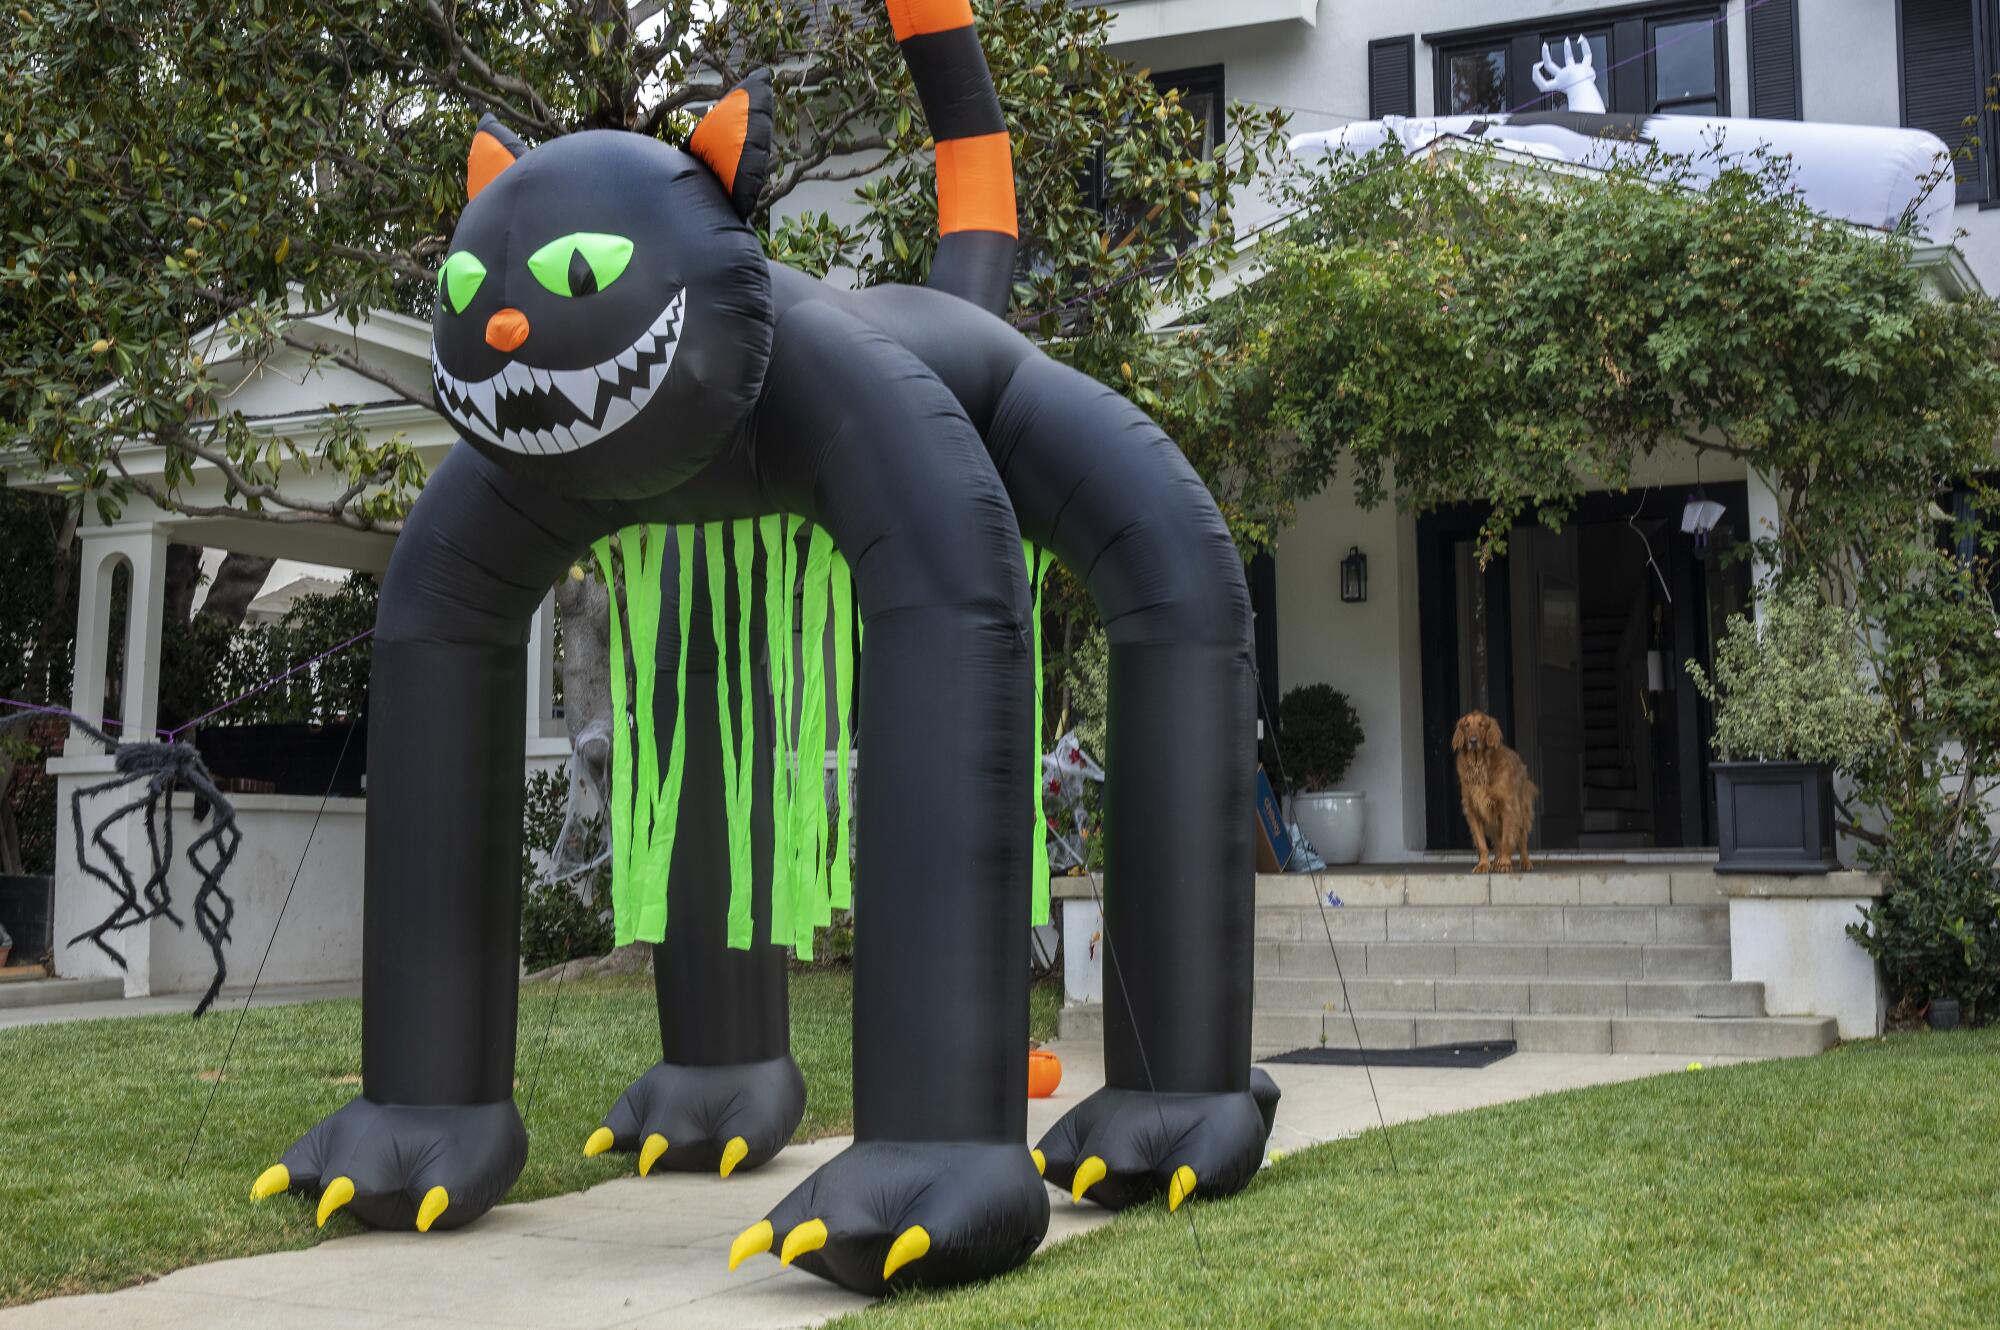 Buddy, a golden retriever, checks out a giant inflatable black cat that has taken over the front walk of his family's home